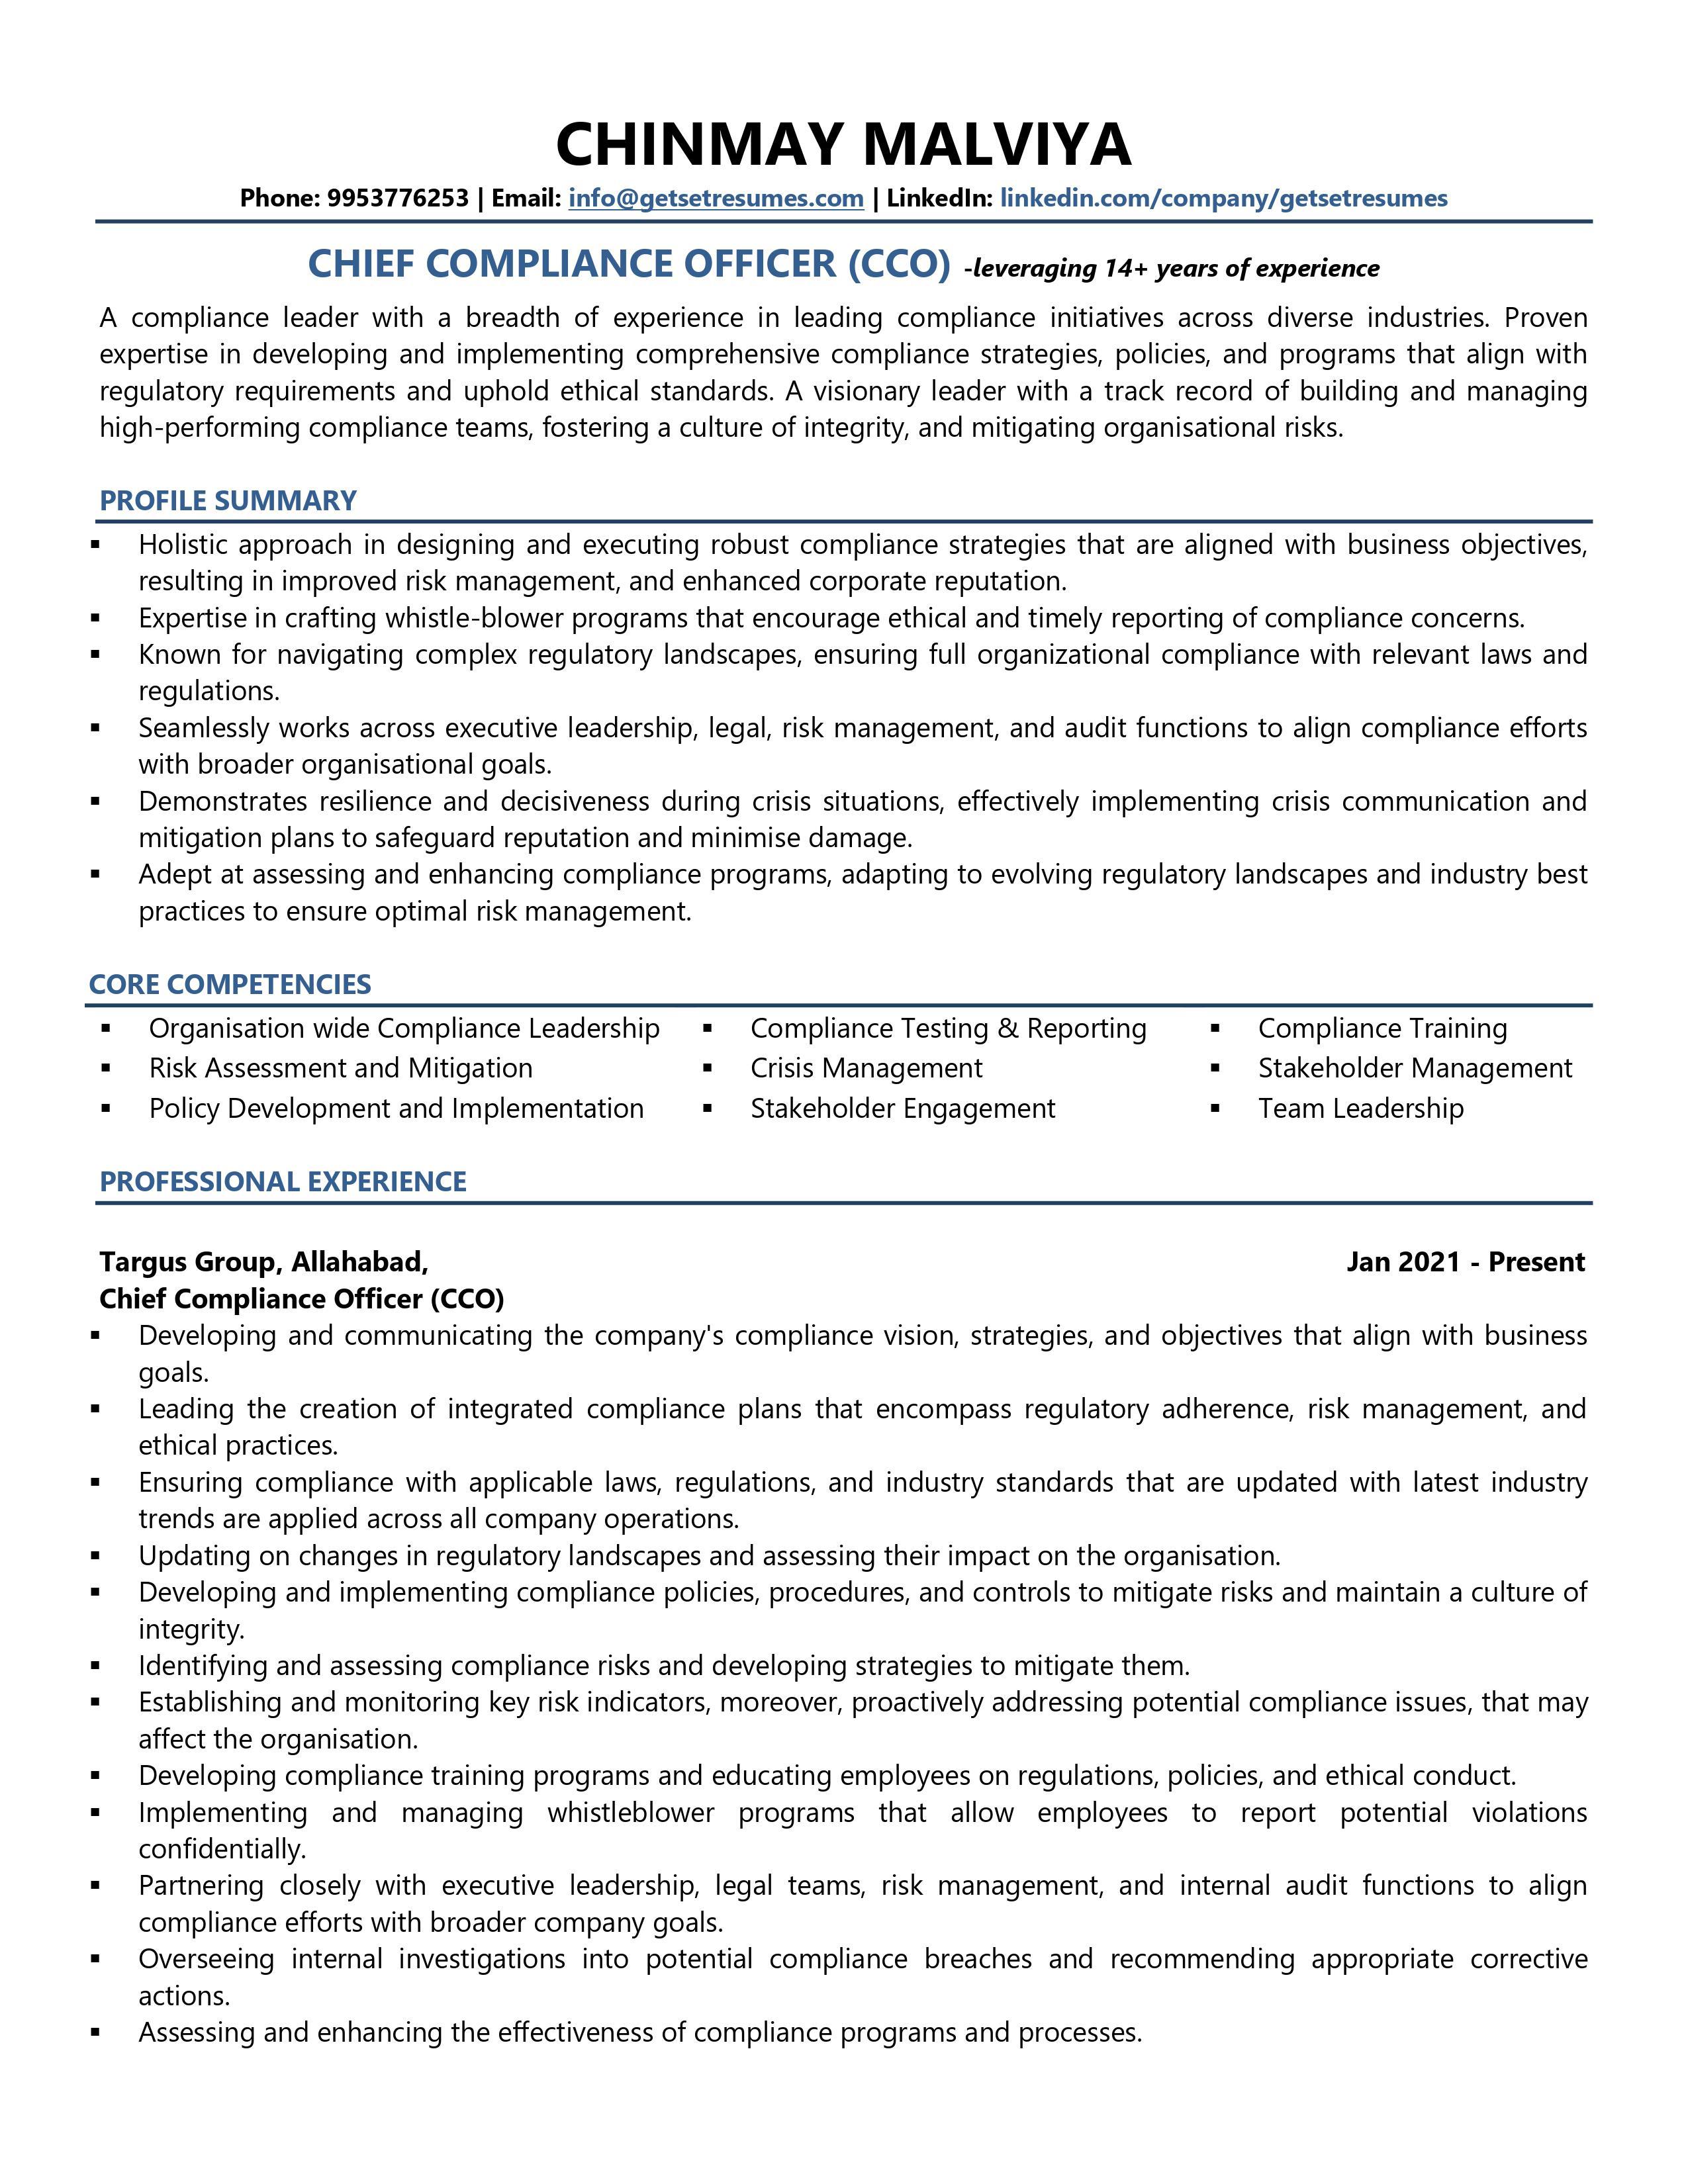 Chief Compliance Officer - Resume Example & Template